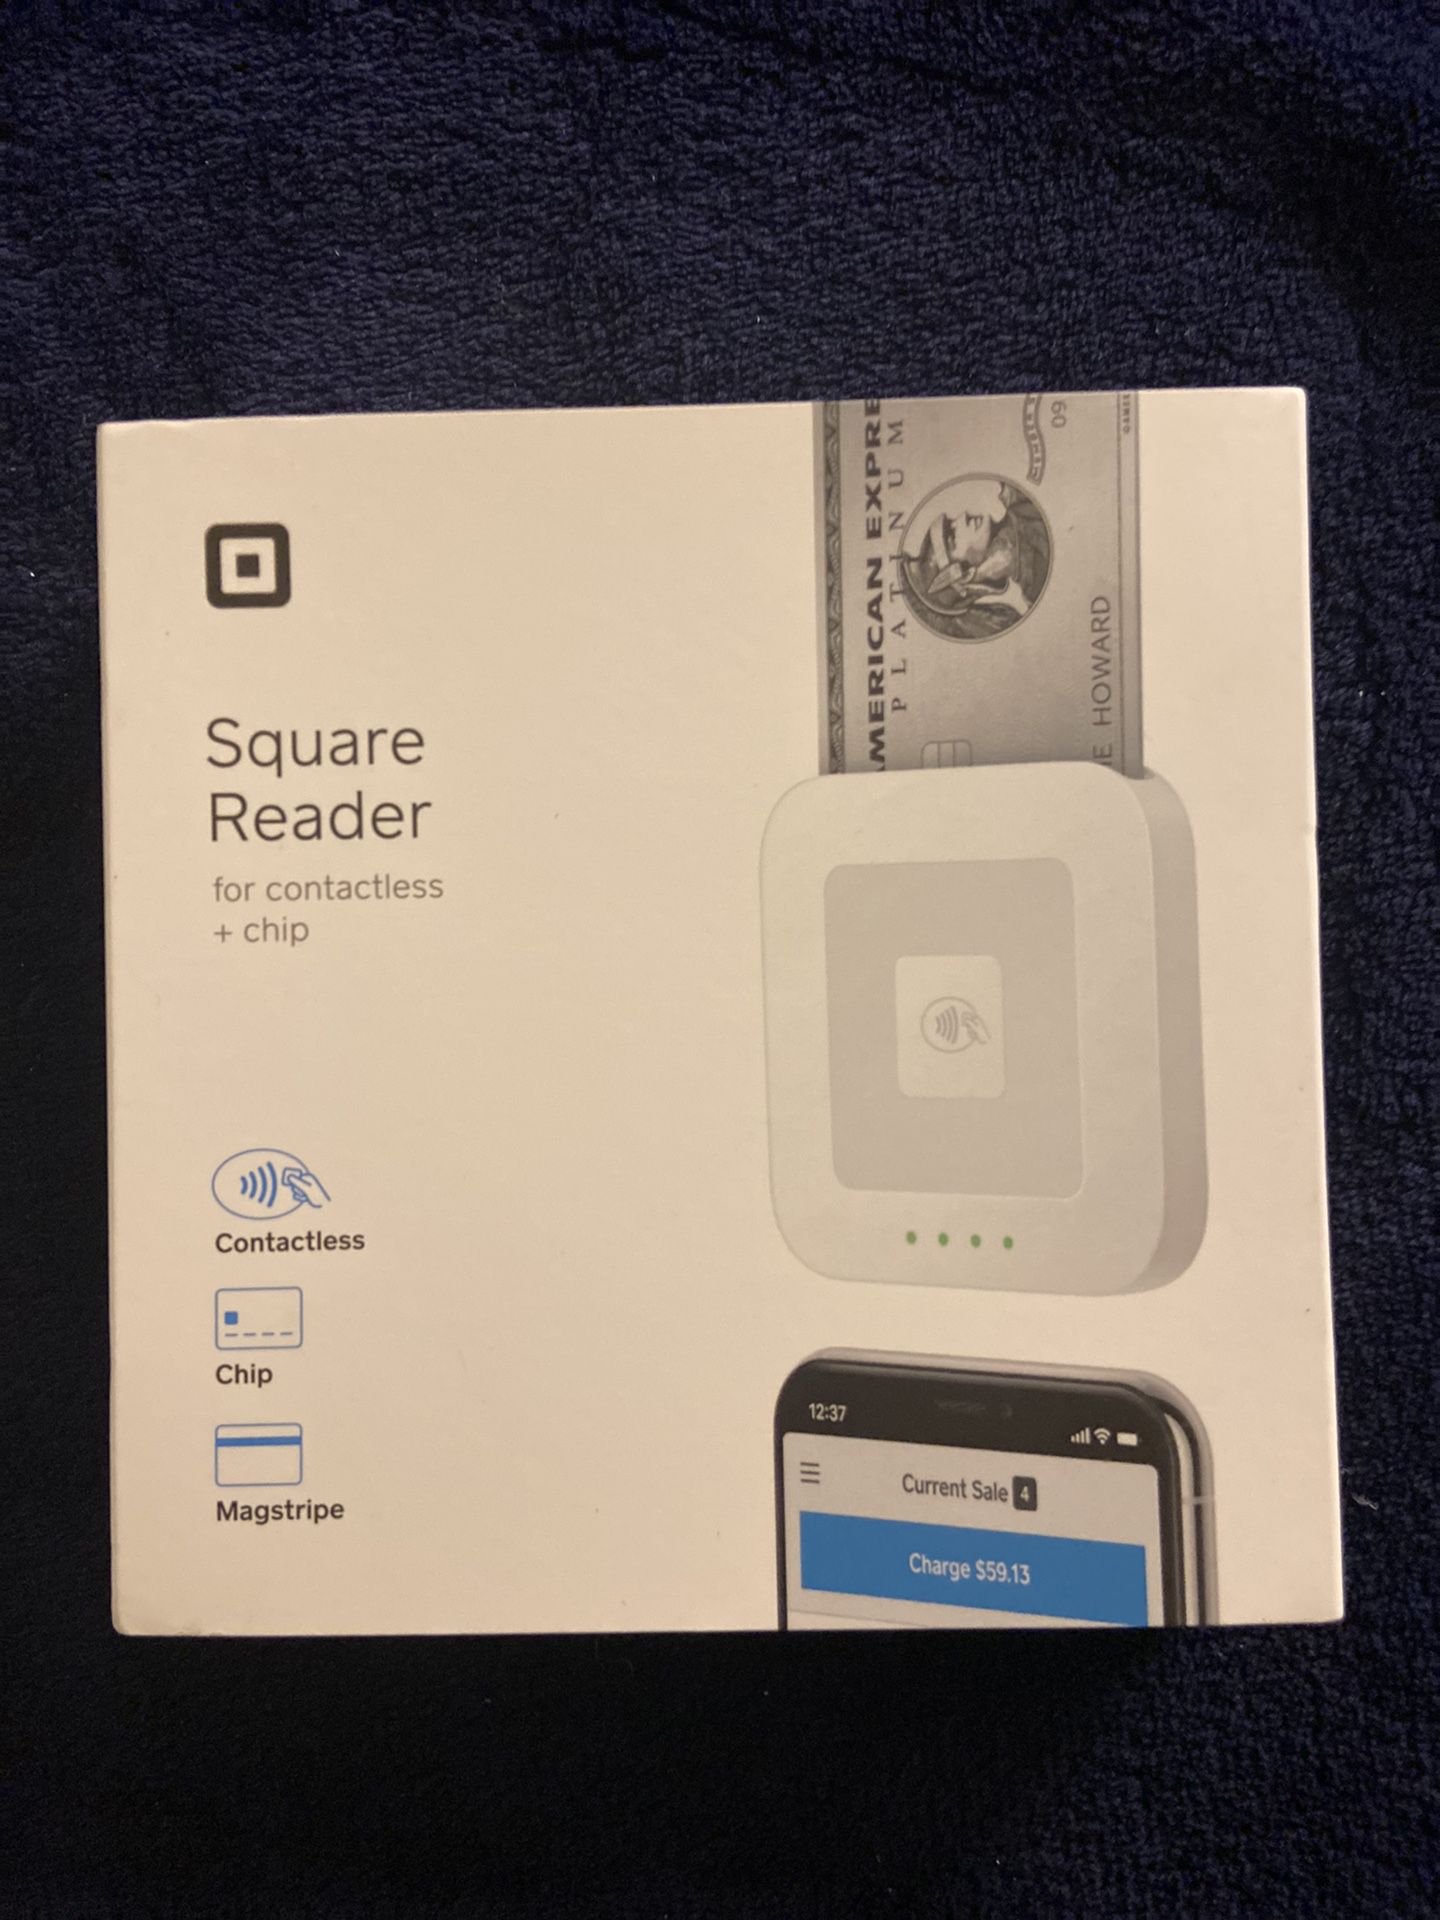 NEW SQUARE READER CONTACTLESS CHIP MAGSTRIPE. BRAND NEW! Will Ship Same Day